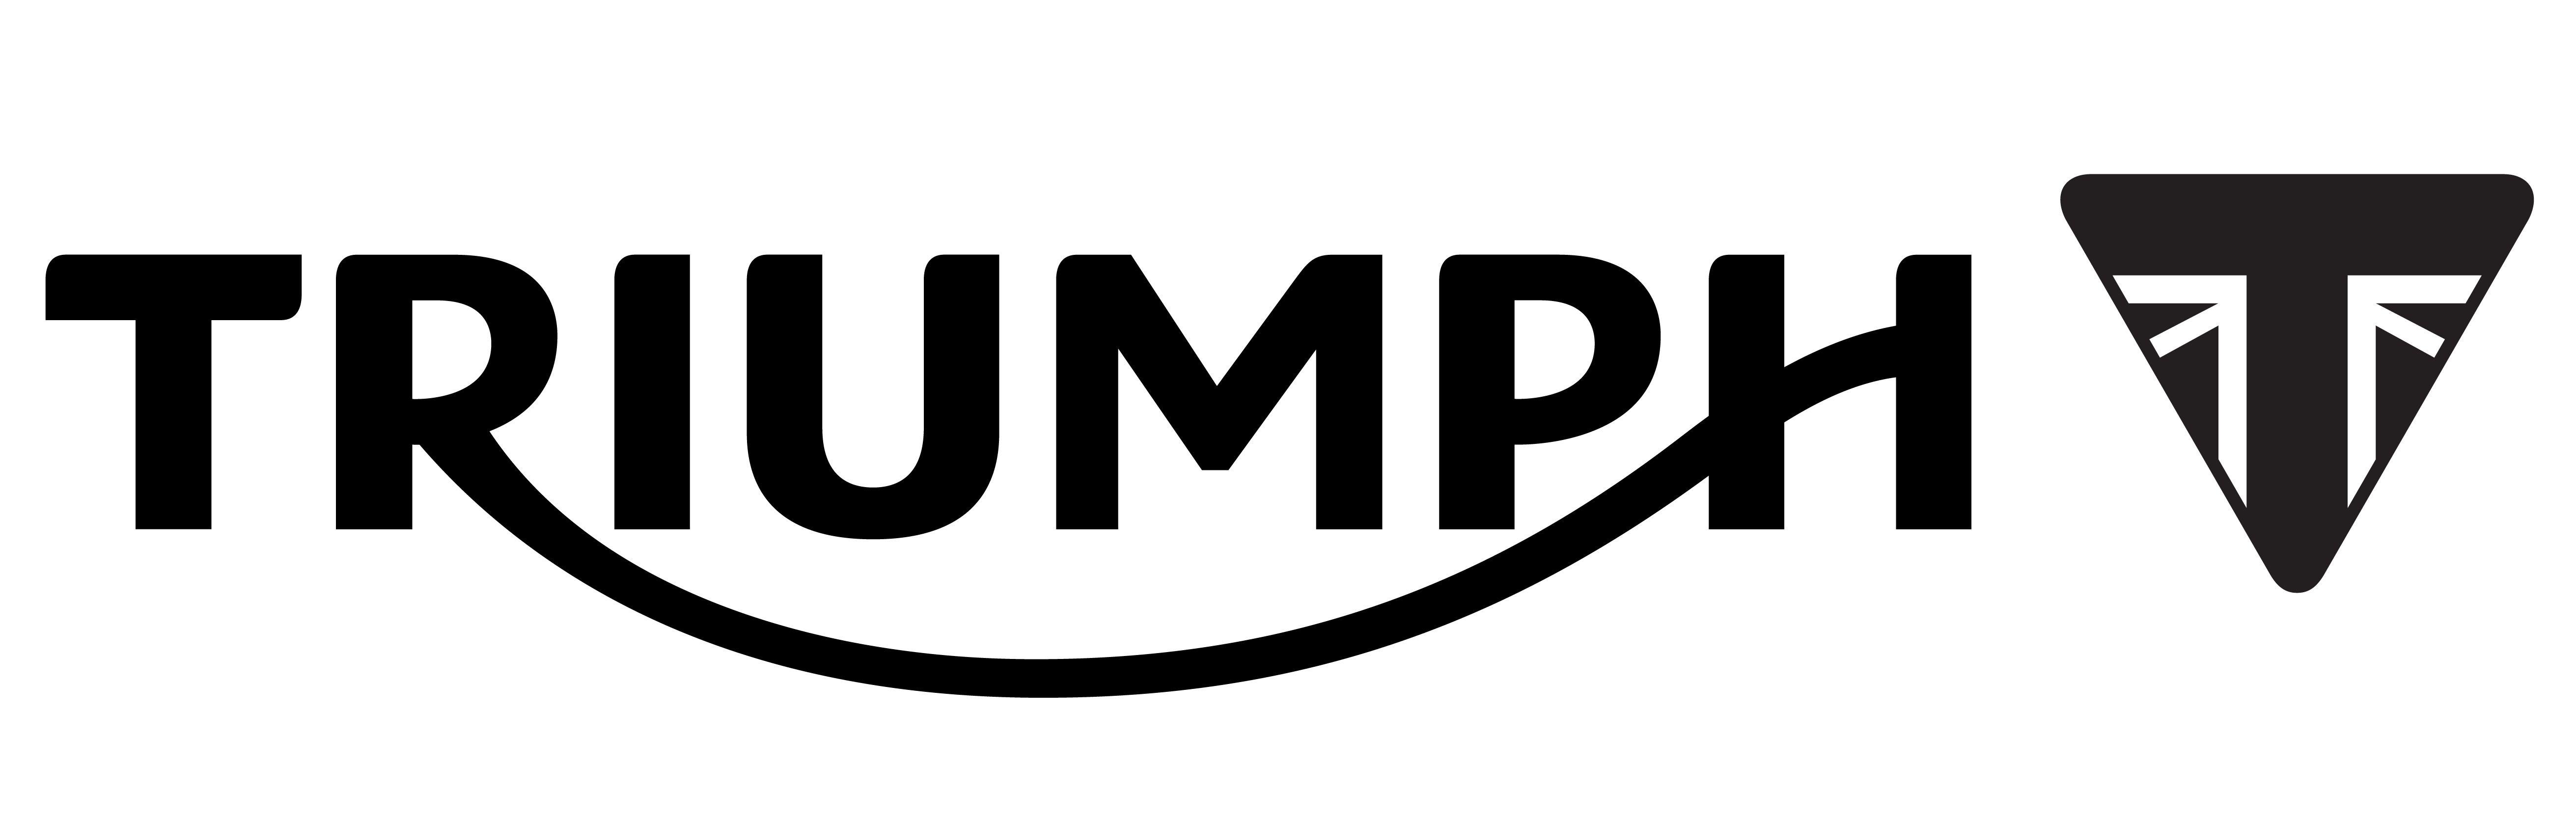 New Triumph Motorcycle Logo - Triumph logo: history, evolution, meaning